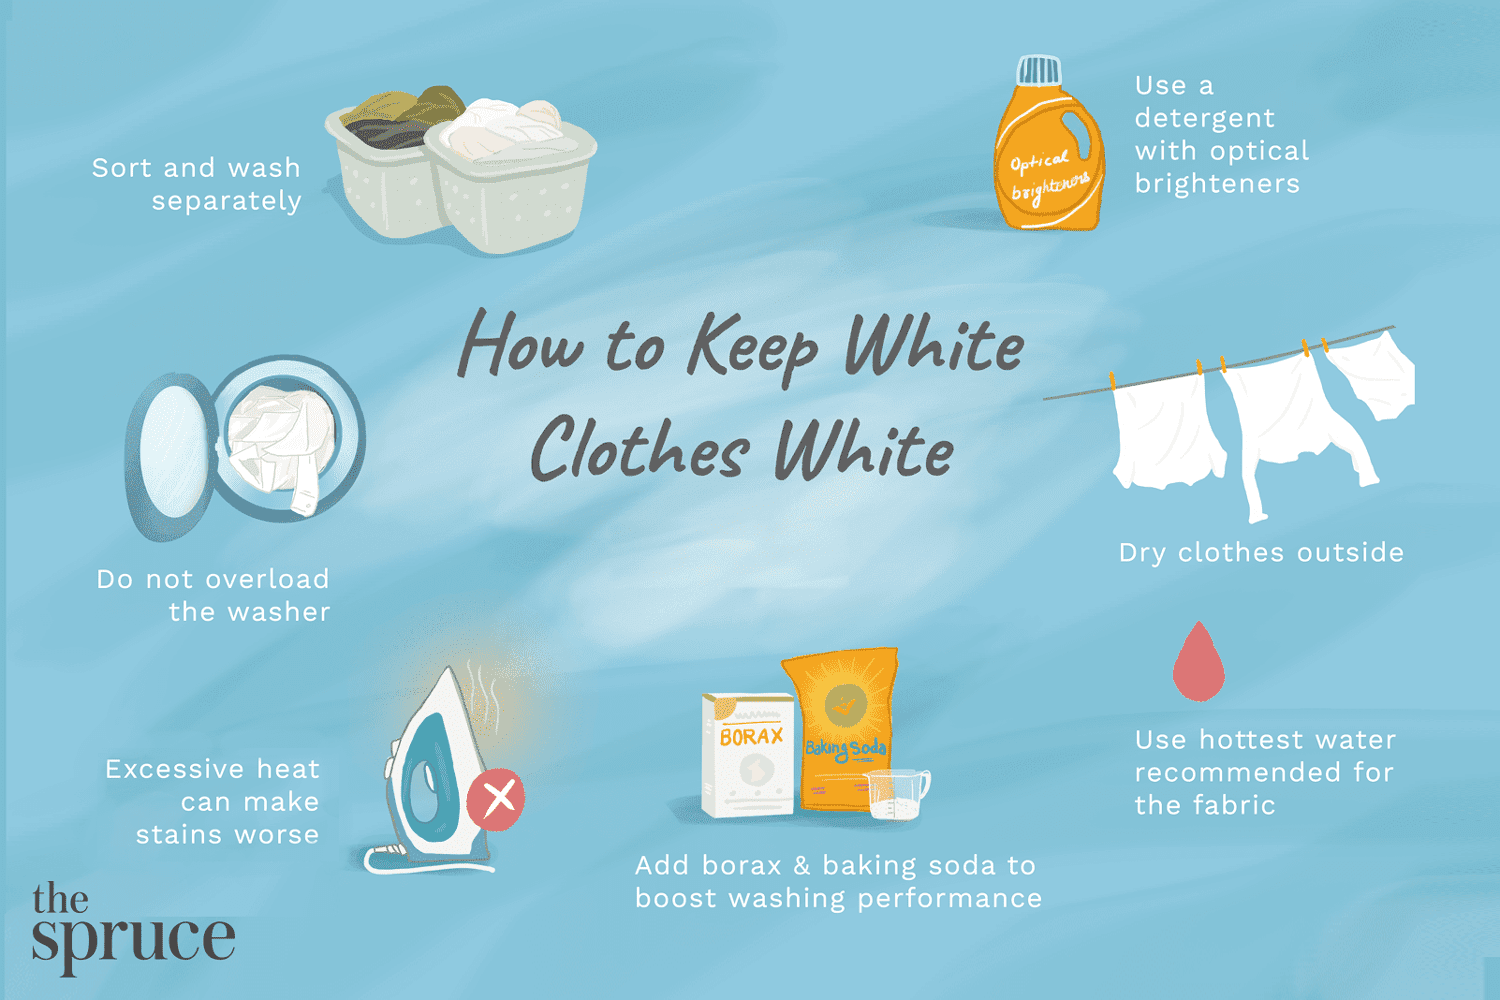 How to use bleach in laundry – expert tips for the whitest whites